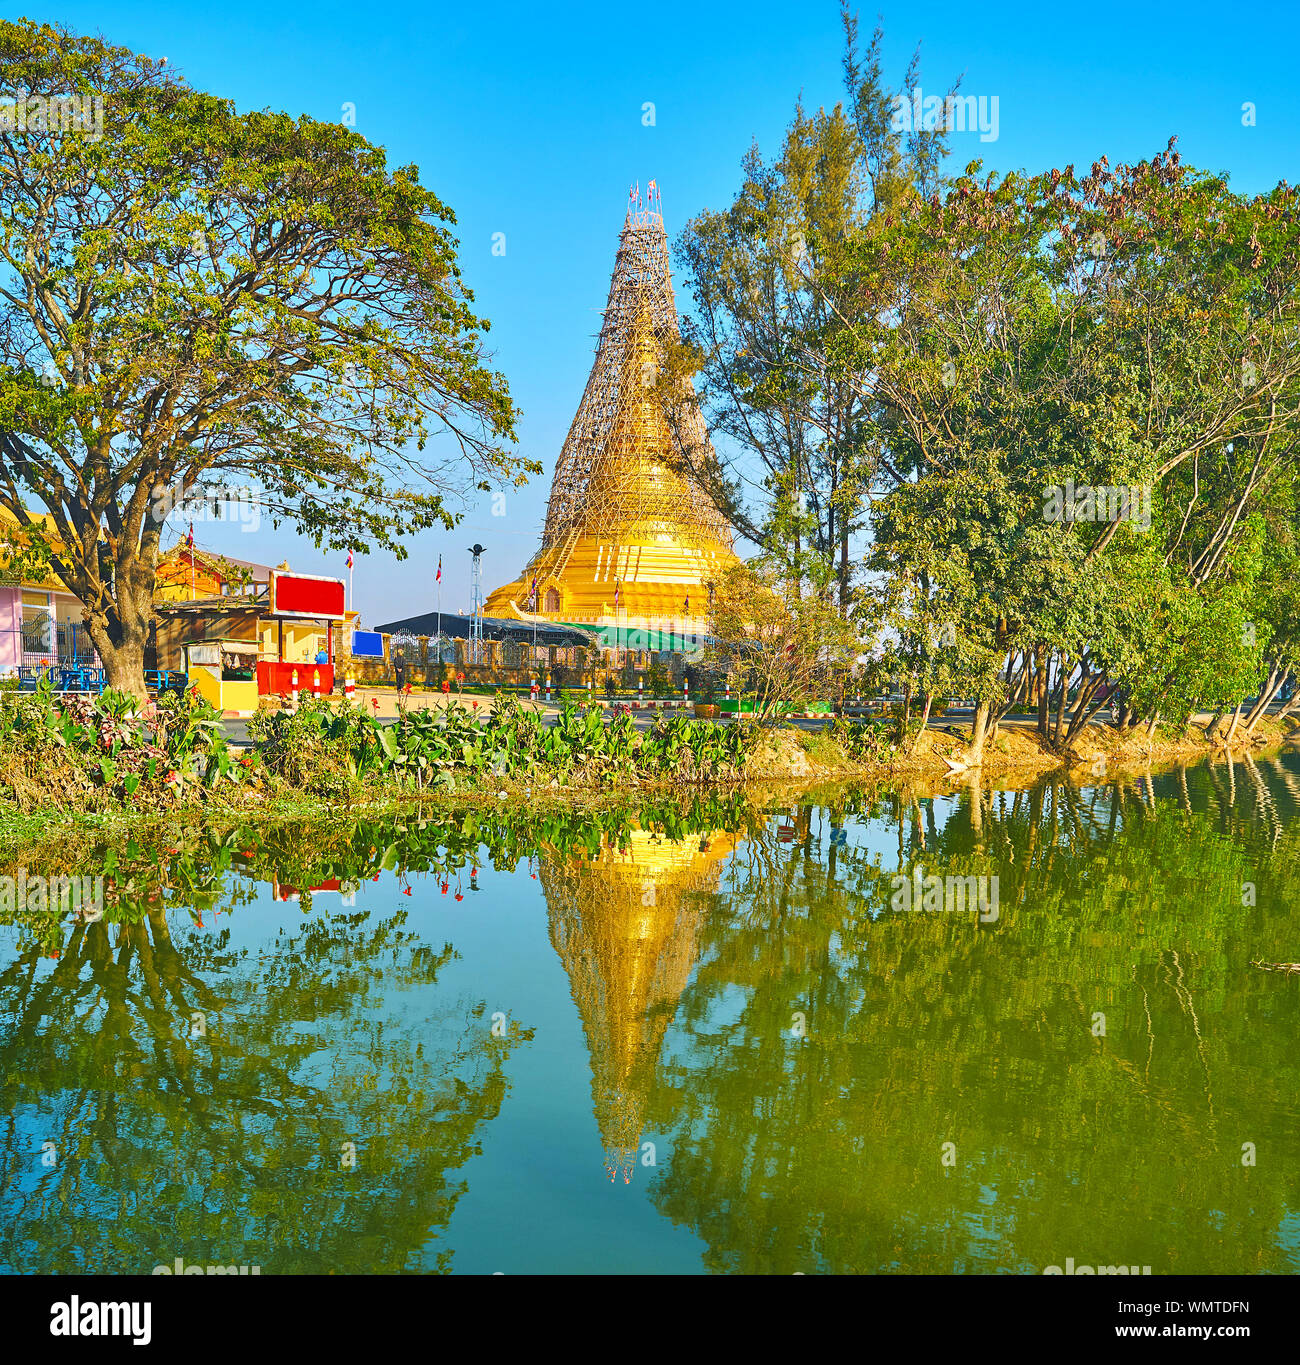 The spread green trees and golden Shwe Baww Di Pagoda are reflected on mirror surface of Tharzi Pond, Nyaungshwe, Myanmar Stock Photo